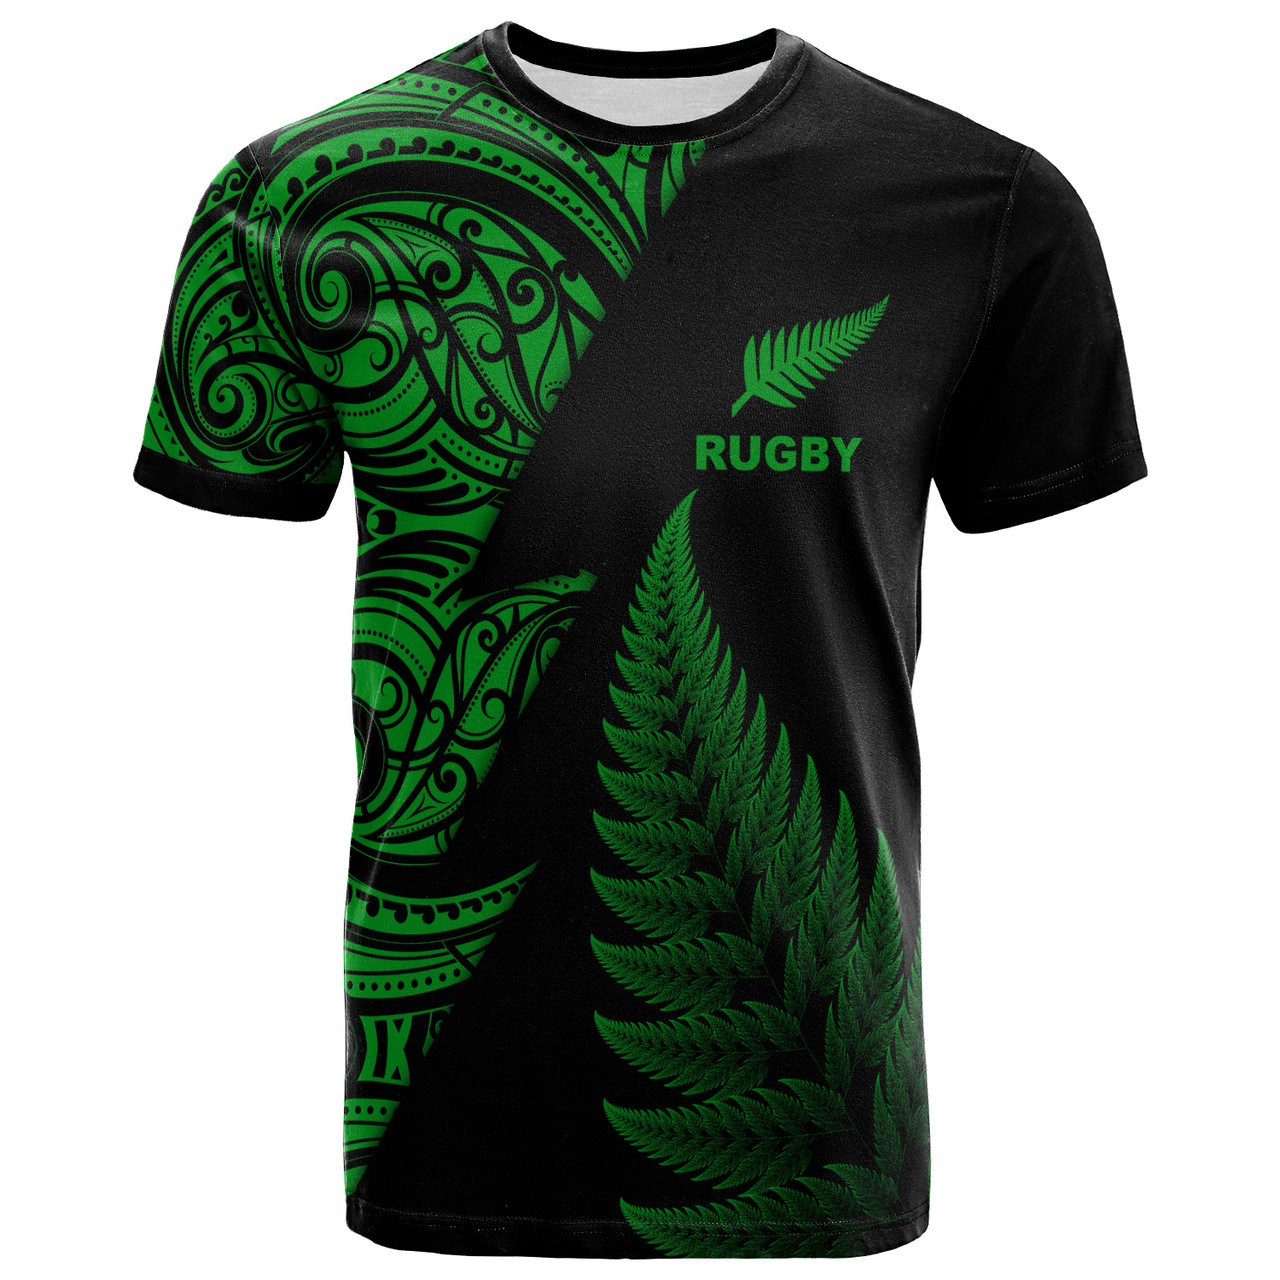 New Zealand Custom Personalised T-Shirt - New Zealand Rugby Silver Fern